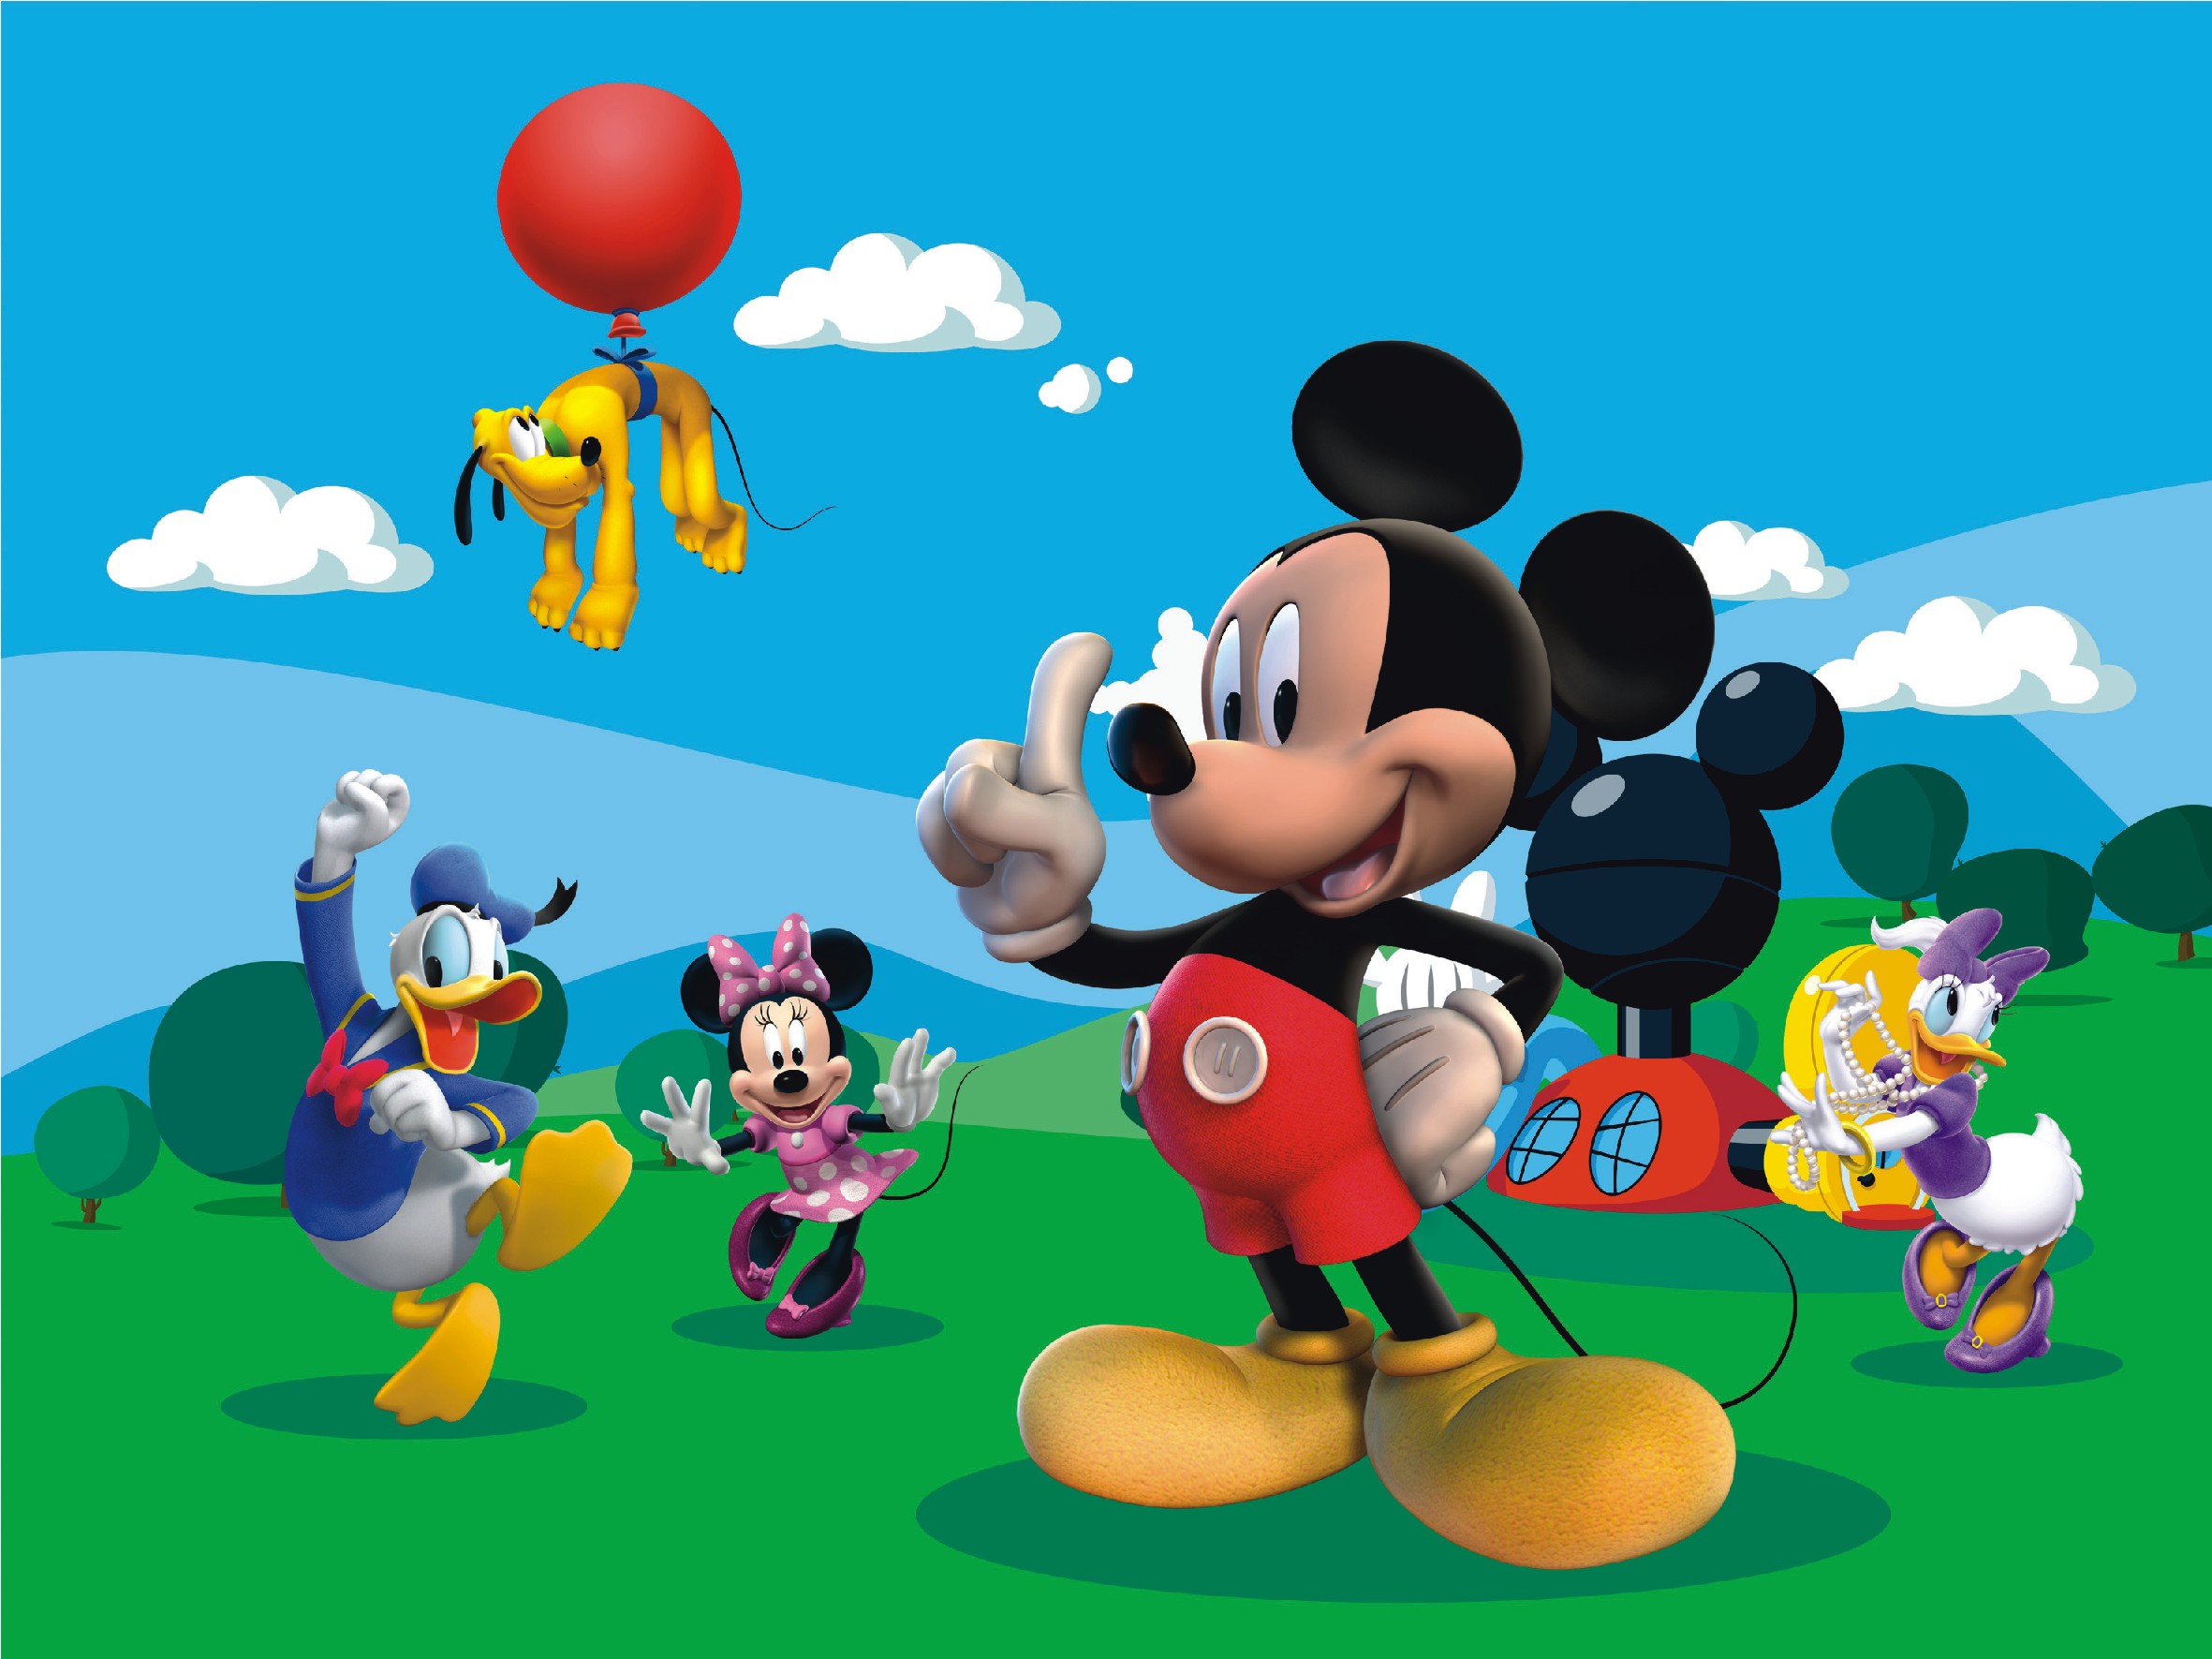 [45+] Mickey Mouse Clubhouse Wallpaper Border on WallpaperSafari